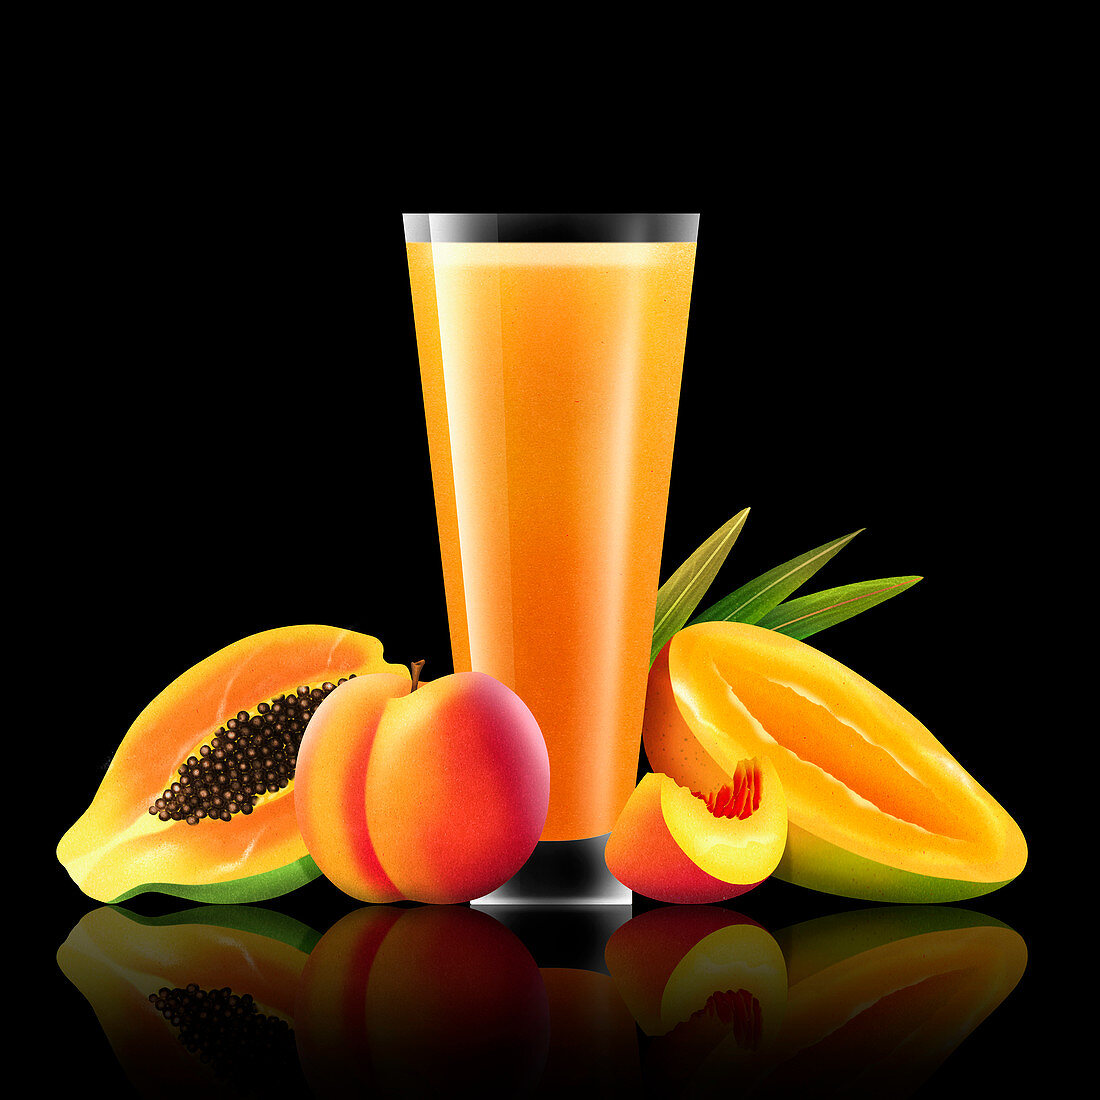 Fruit with glass of juice, illustration